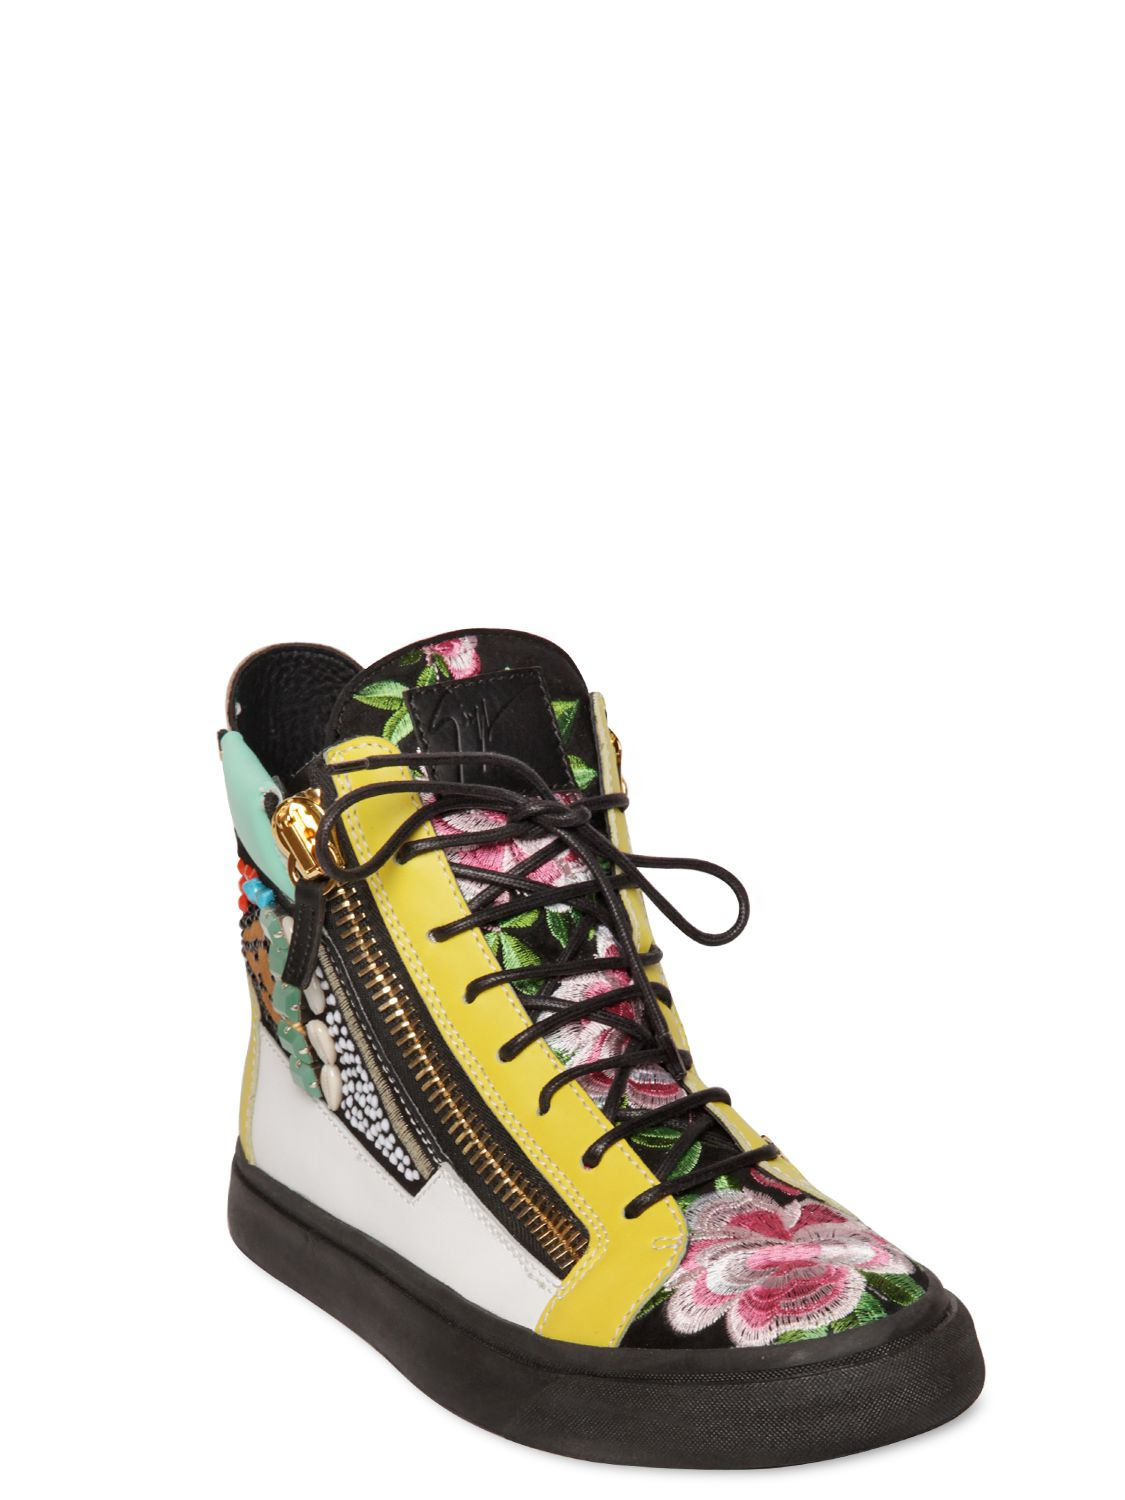 Lyst - Giuseppe zanotti Embellished High Top Sneakers for Men